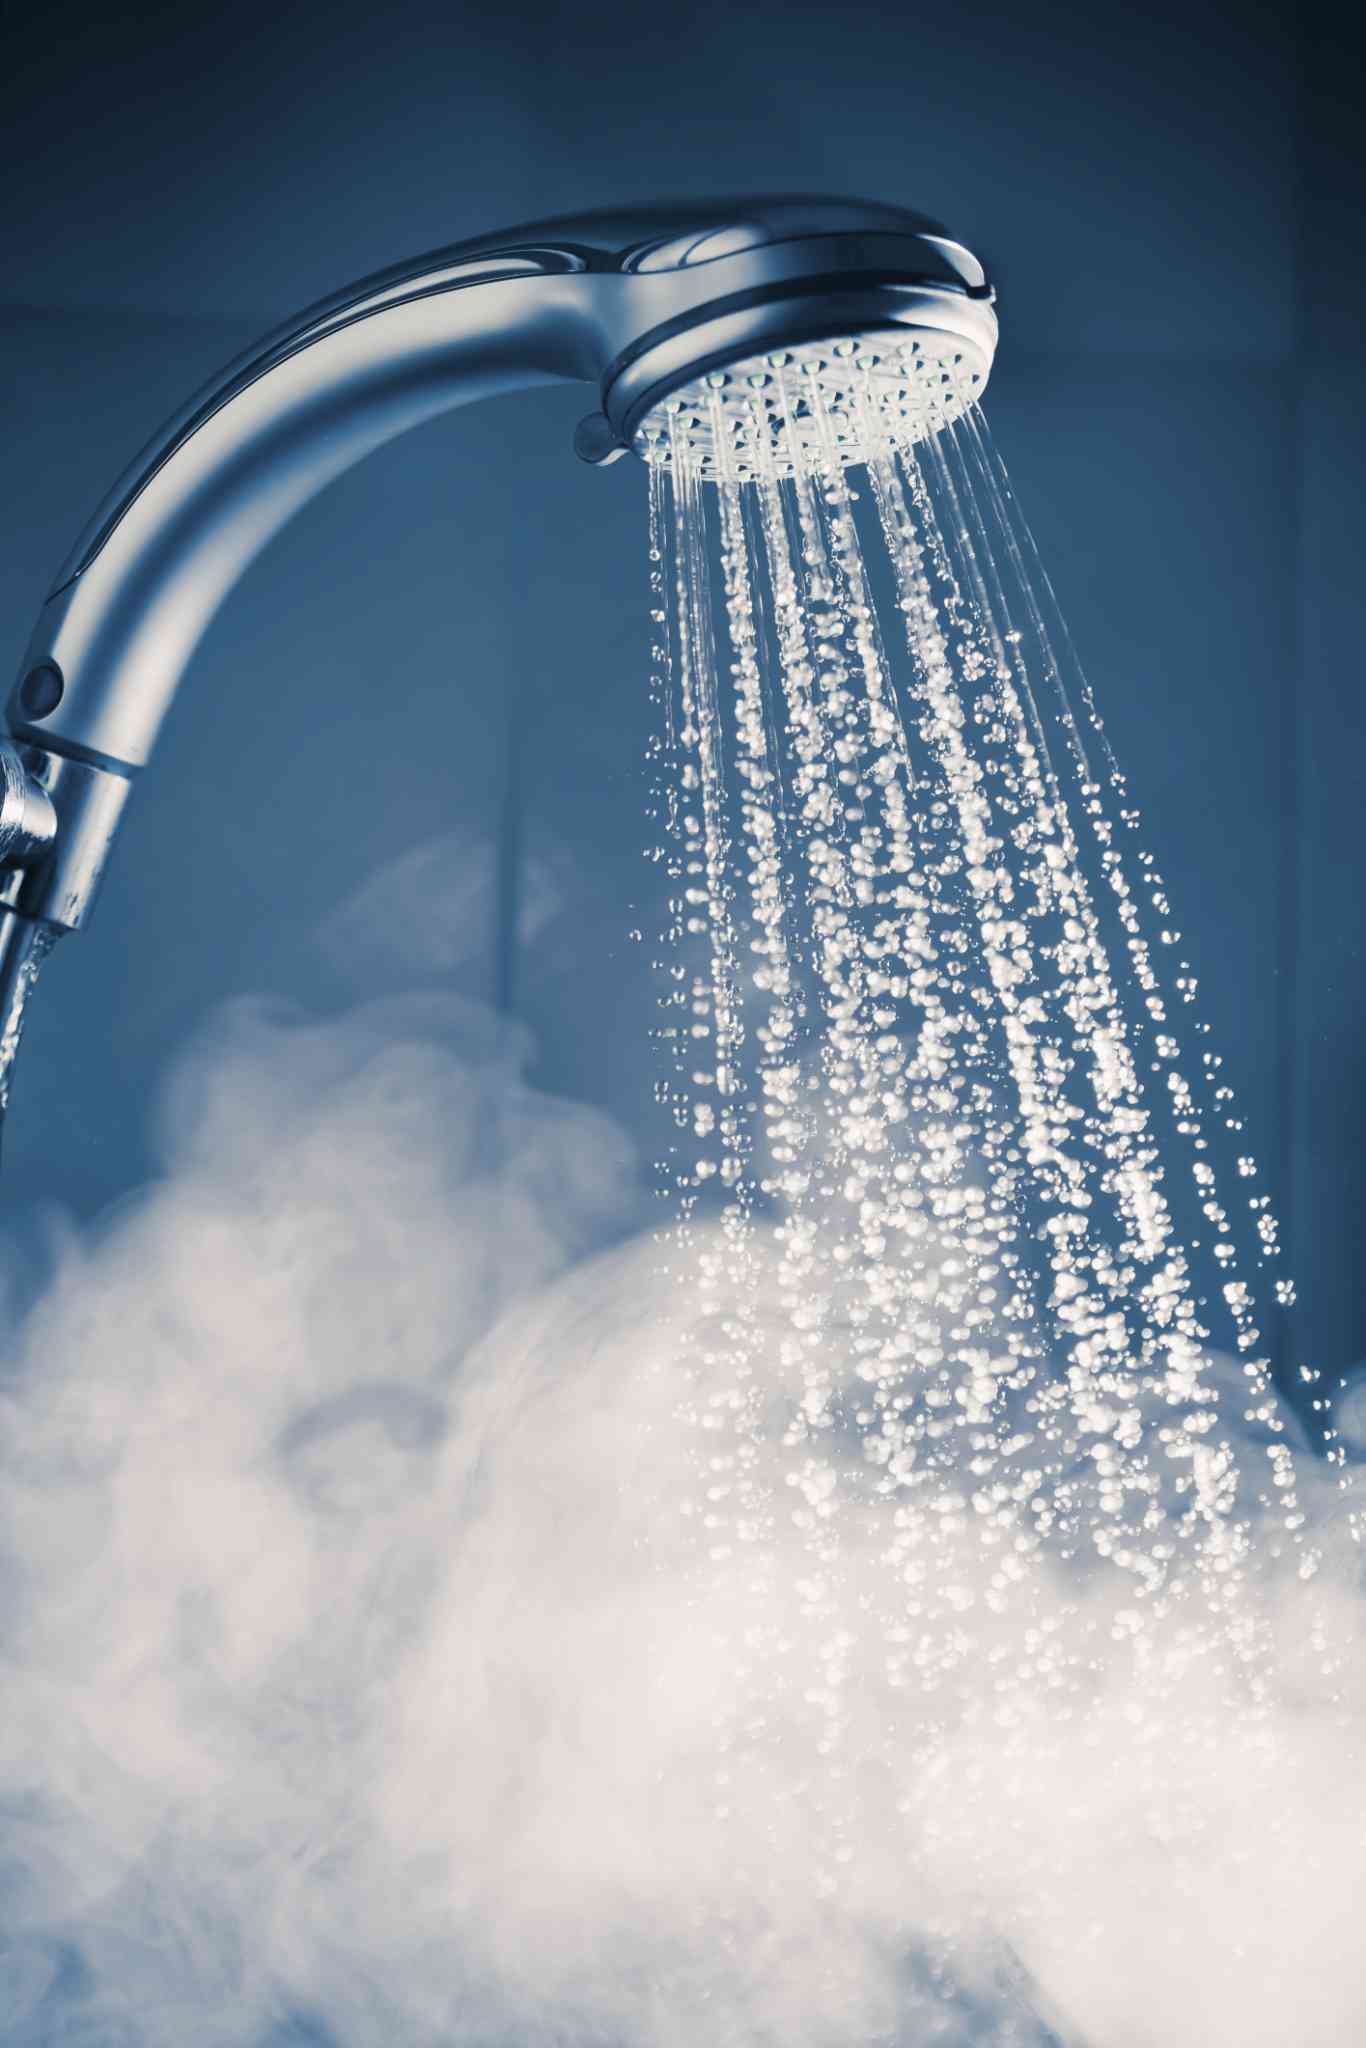 How To Fix Hot Water Problems In Your Shower